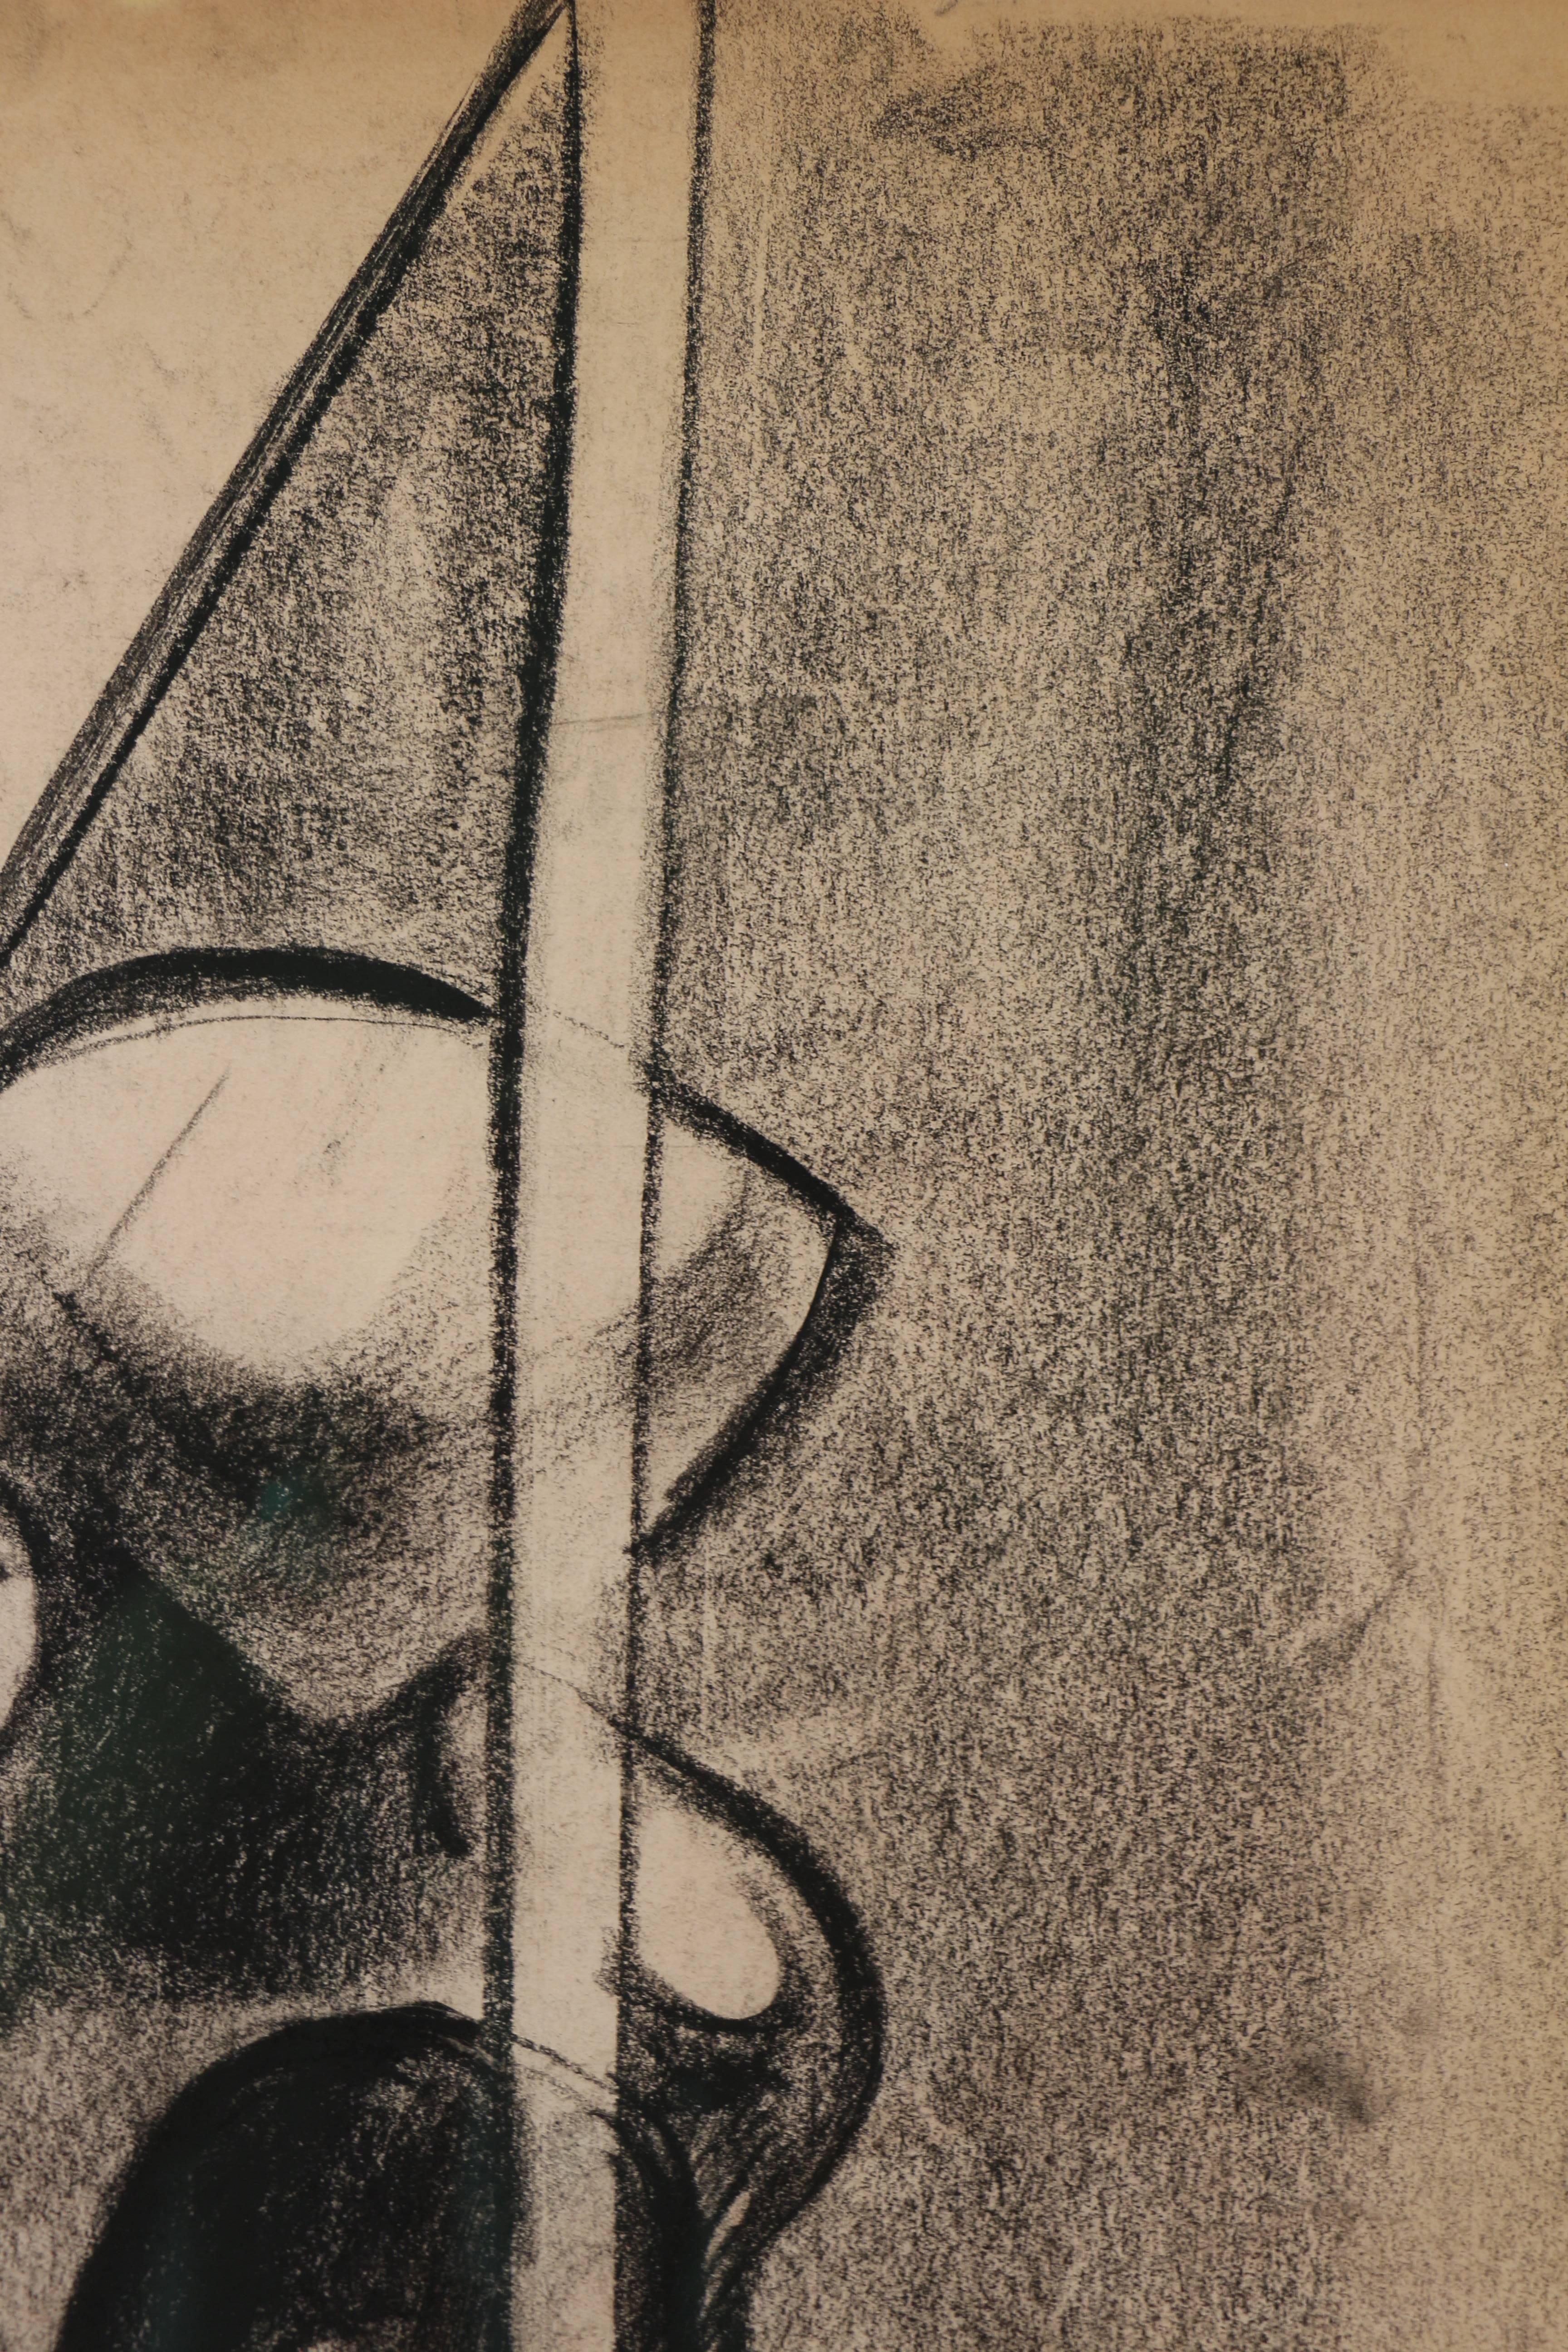 Untitled, original work on paper with dark forms and shapes  - Art by Lorser Feitelson